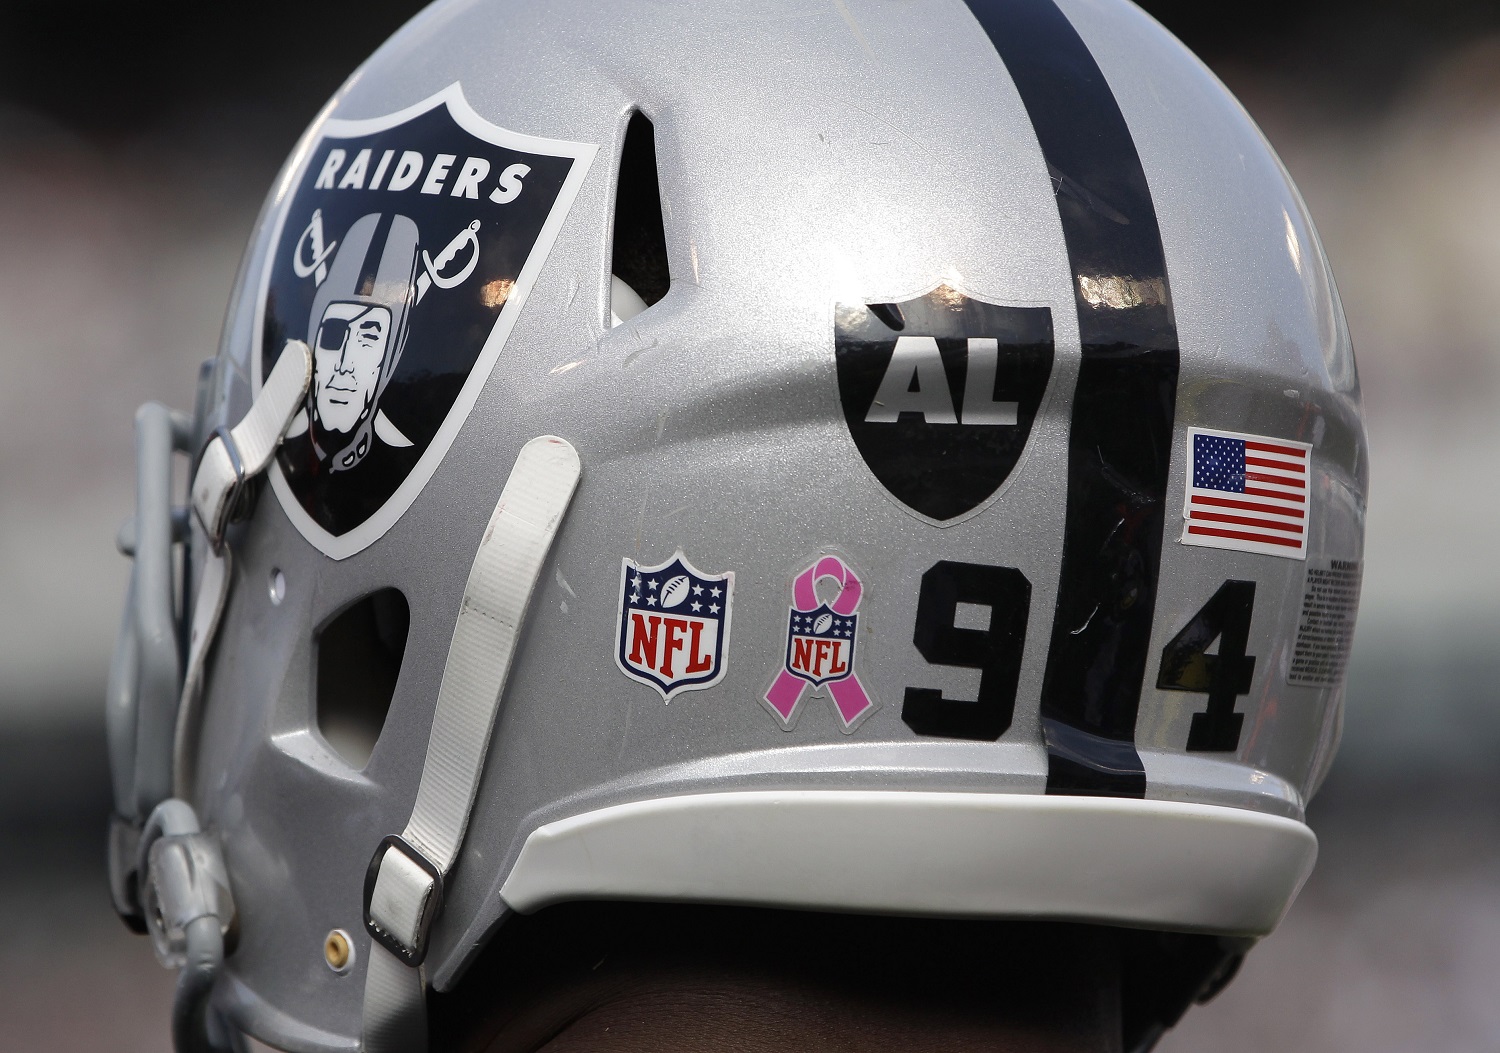 A logo for recently passed Oakland Raiders owner Al Davis is shown on the helmet of defensive end Jarvis Moss (94)  in the fourth quarter of an NFL football game against the Cleveland Browns in Oakland, Calif., Sunday, Oct. 16, 2011. (AP Photo/Paul Sakuma)